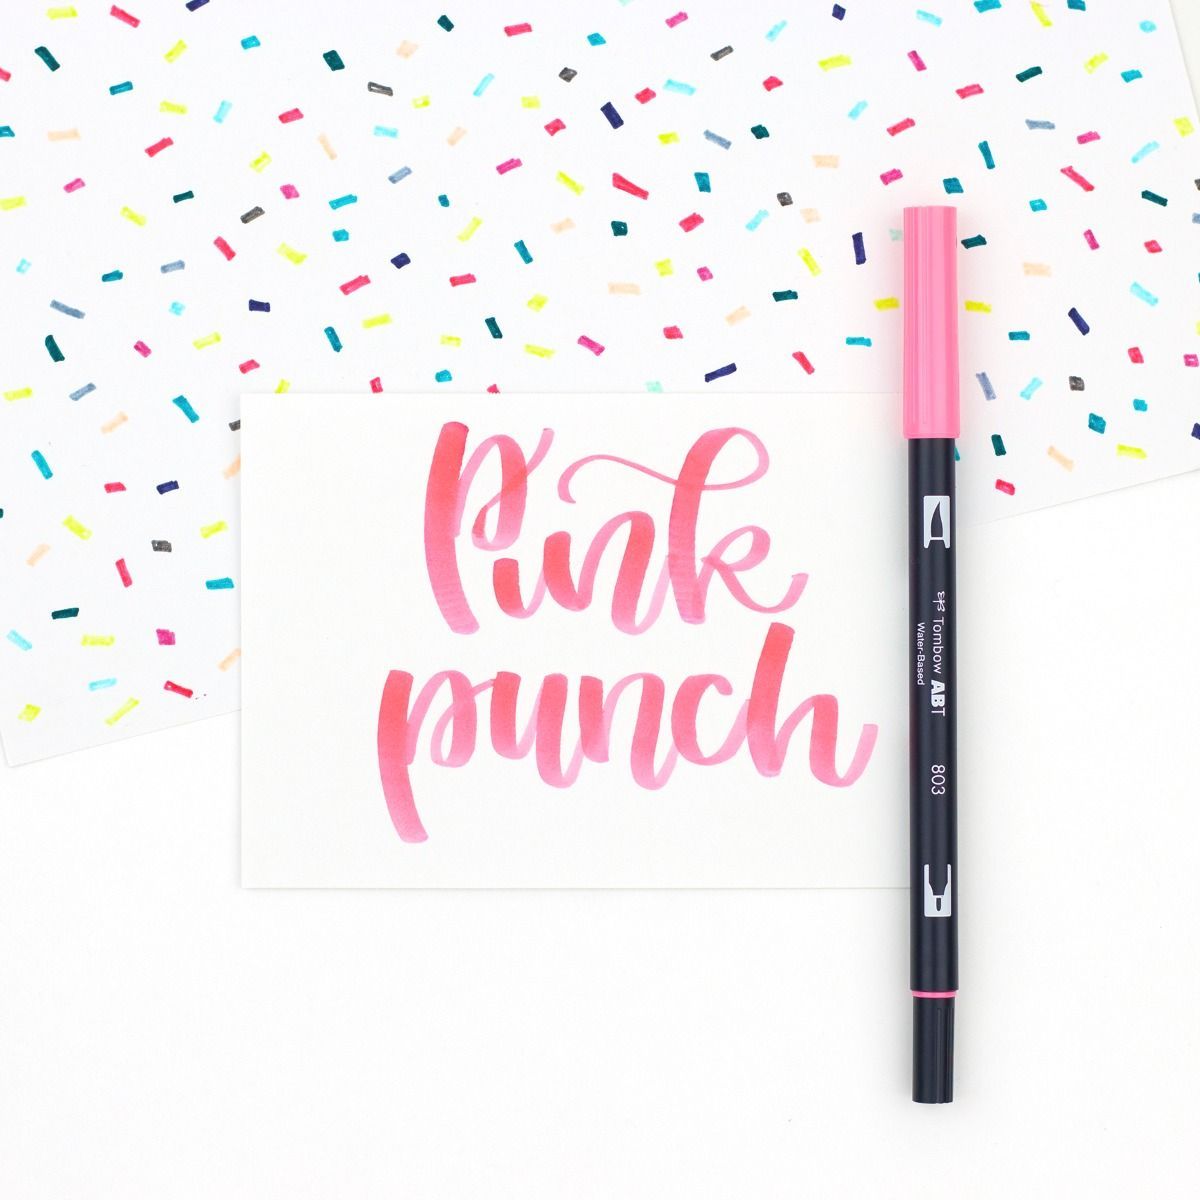 Tombow Dual Brush Pen Box Of 6 Pink Punch